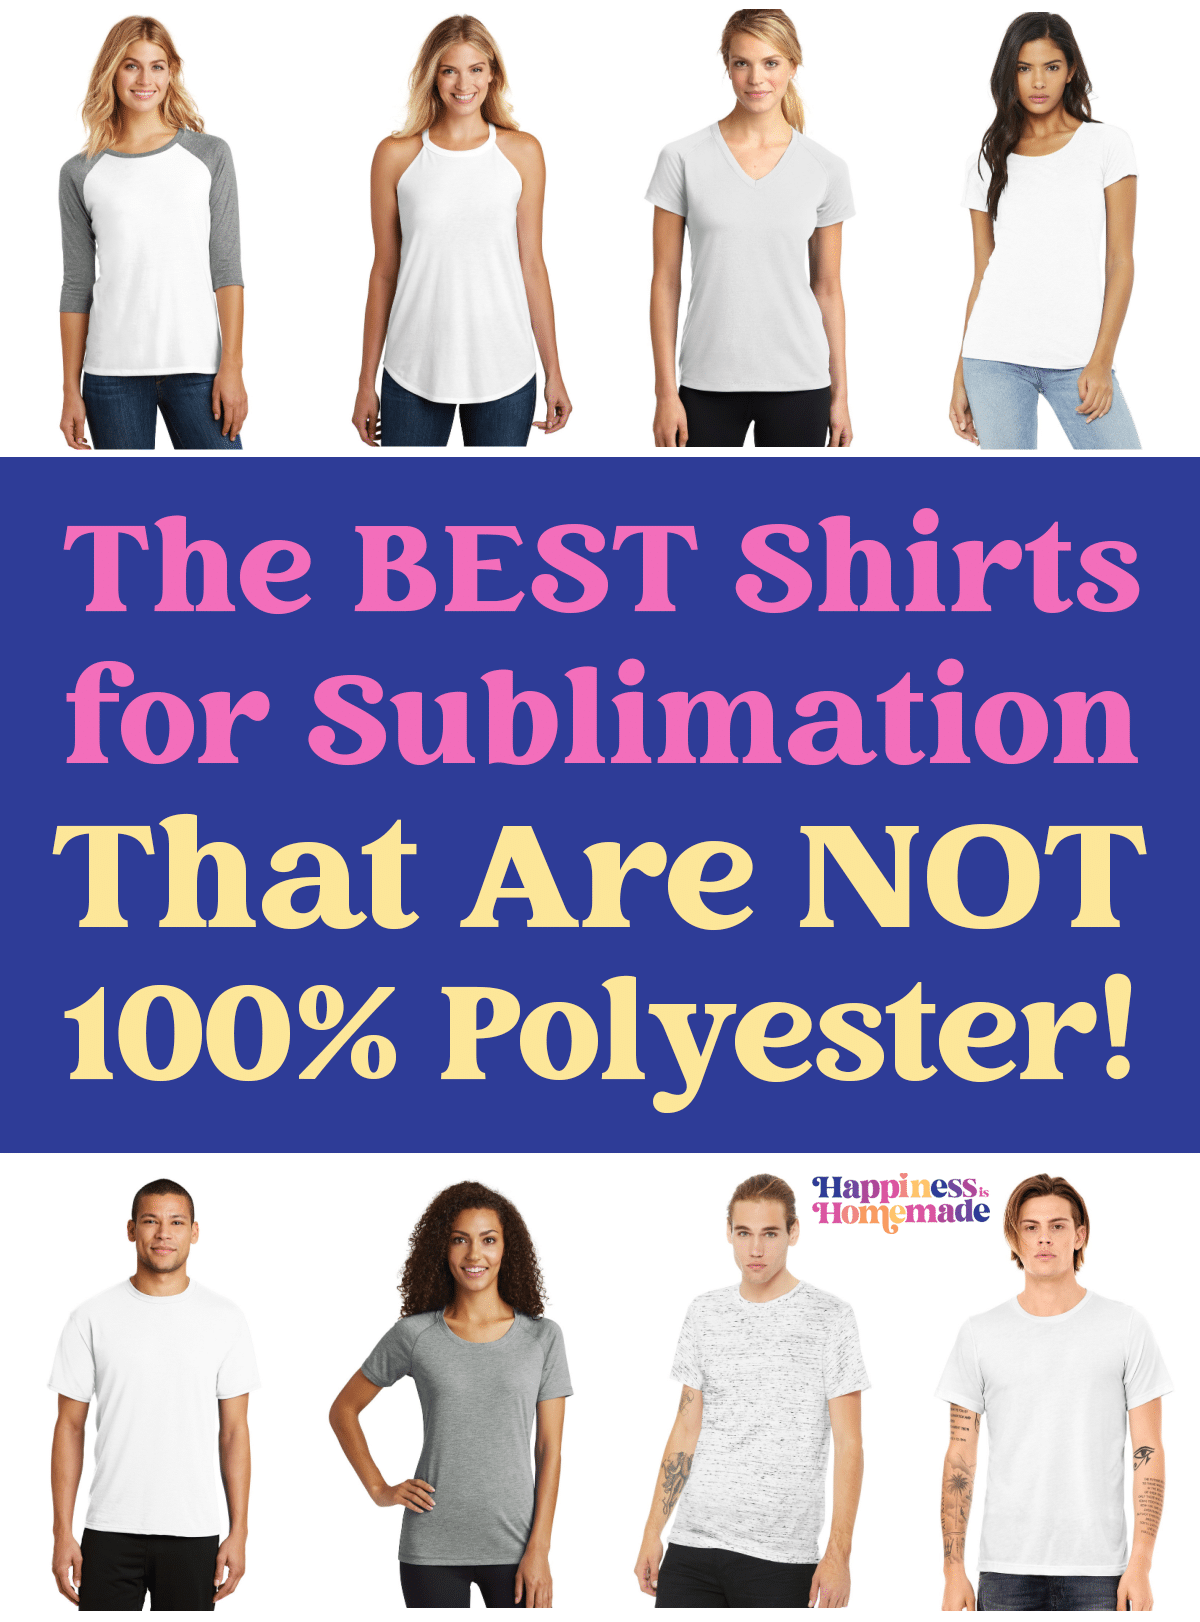 Collage of 8 different shirts with the text "The Best Shirts for Sublimation That Are NOT 100% Polyester"